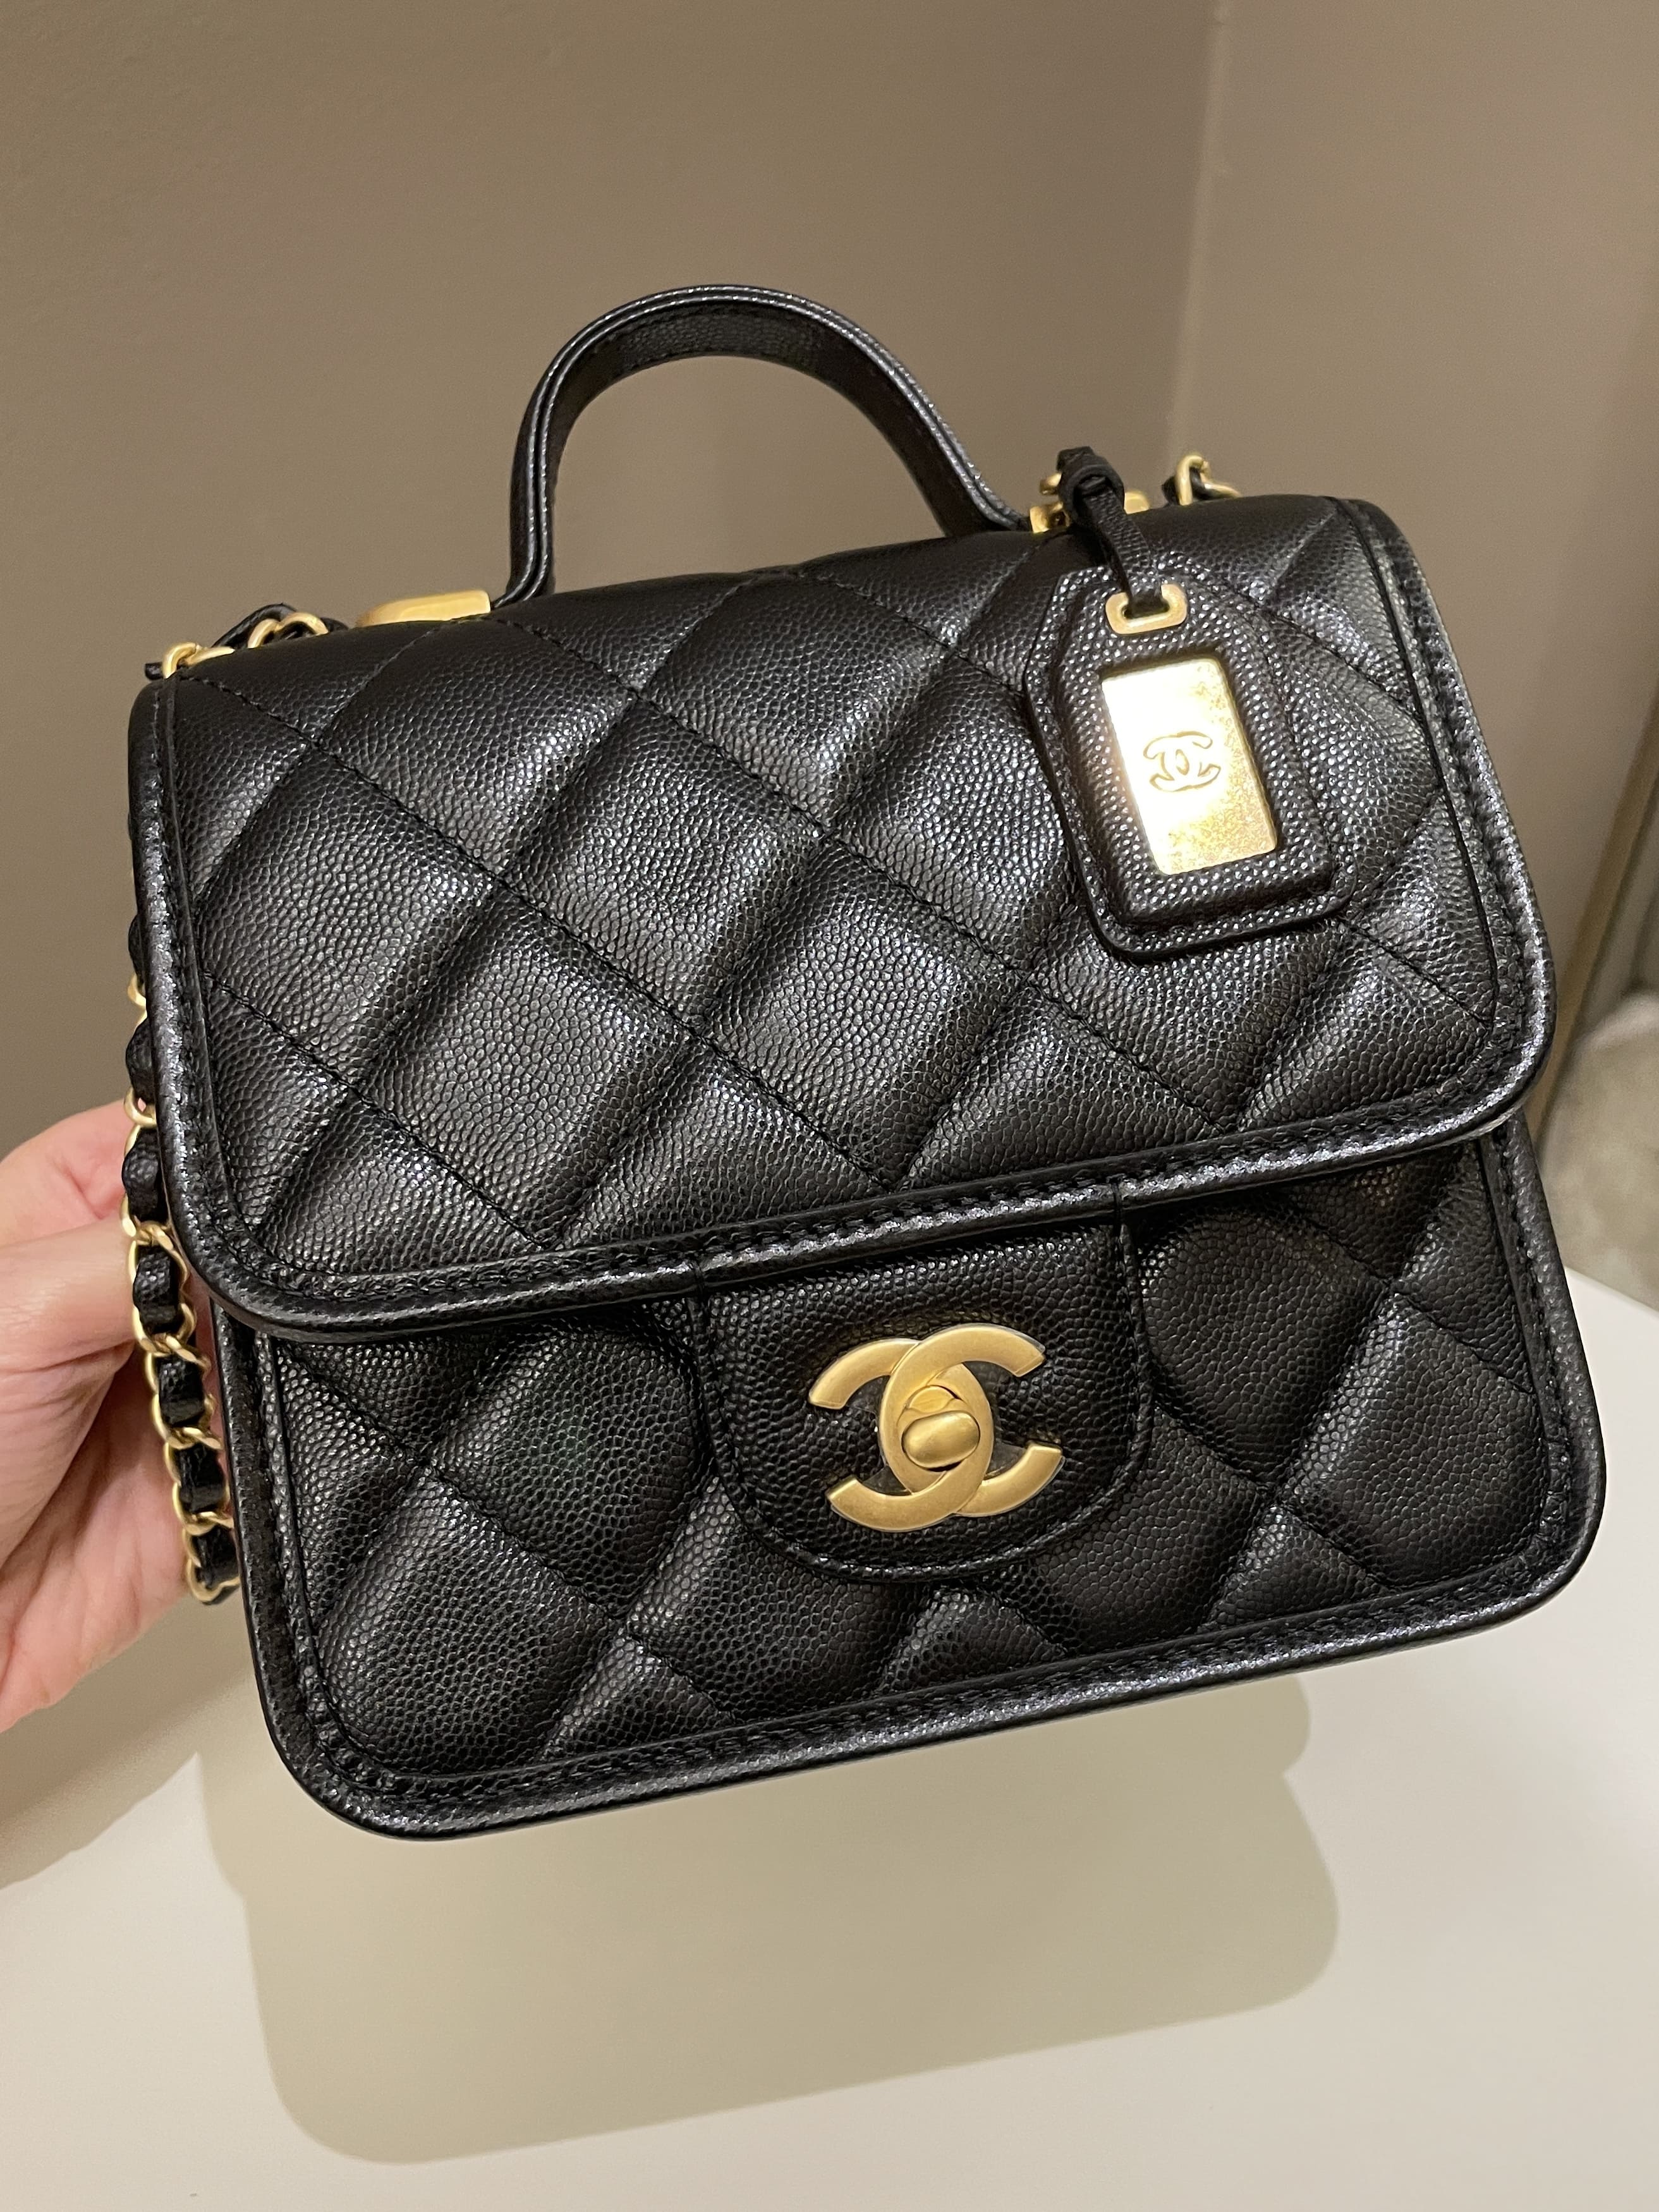 Chanel #CHANELSpringSummer Mini Flap Bag With Top Handle